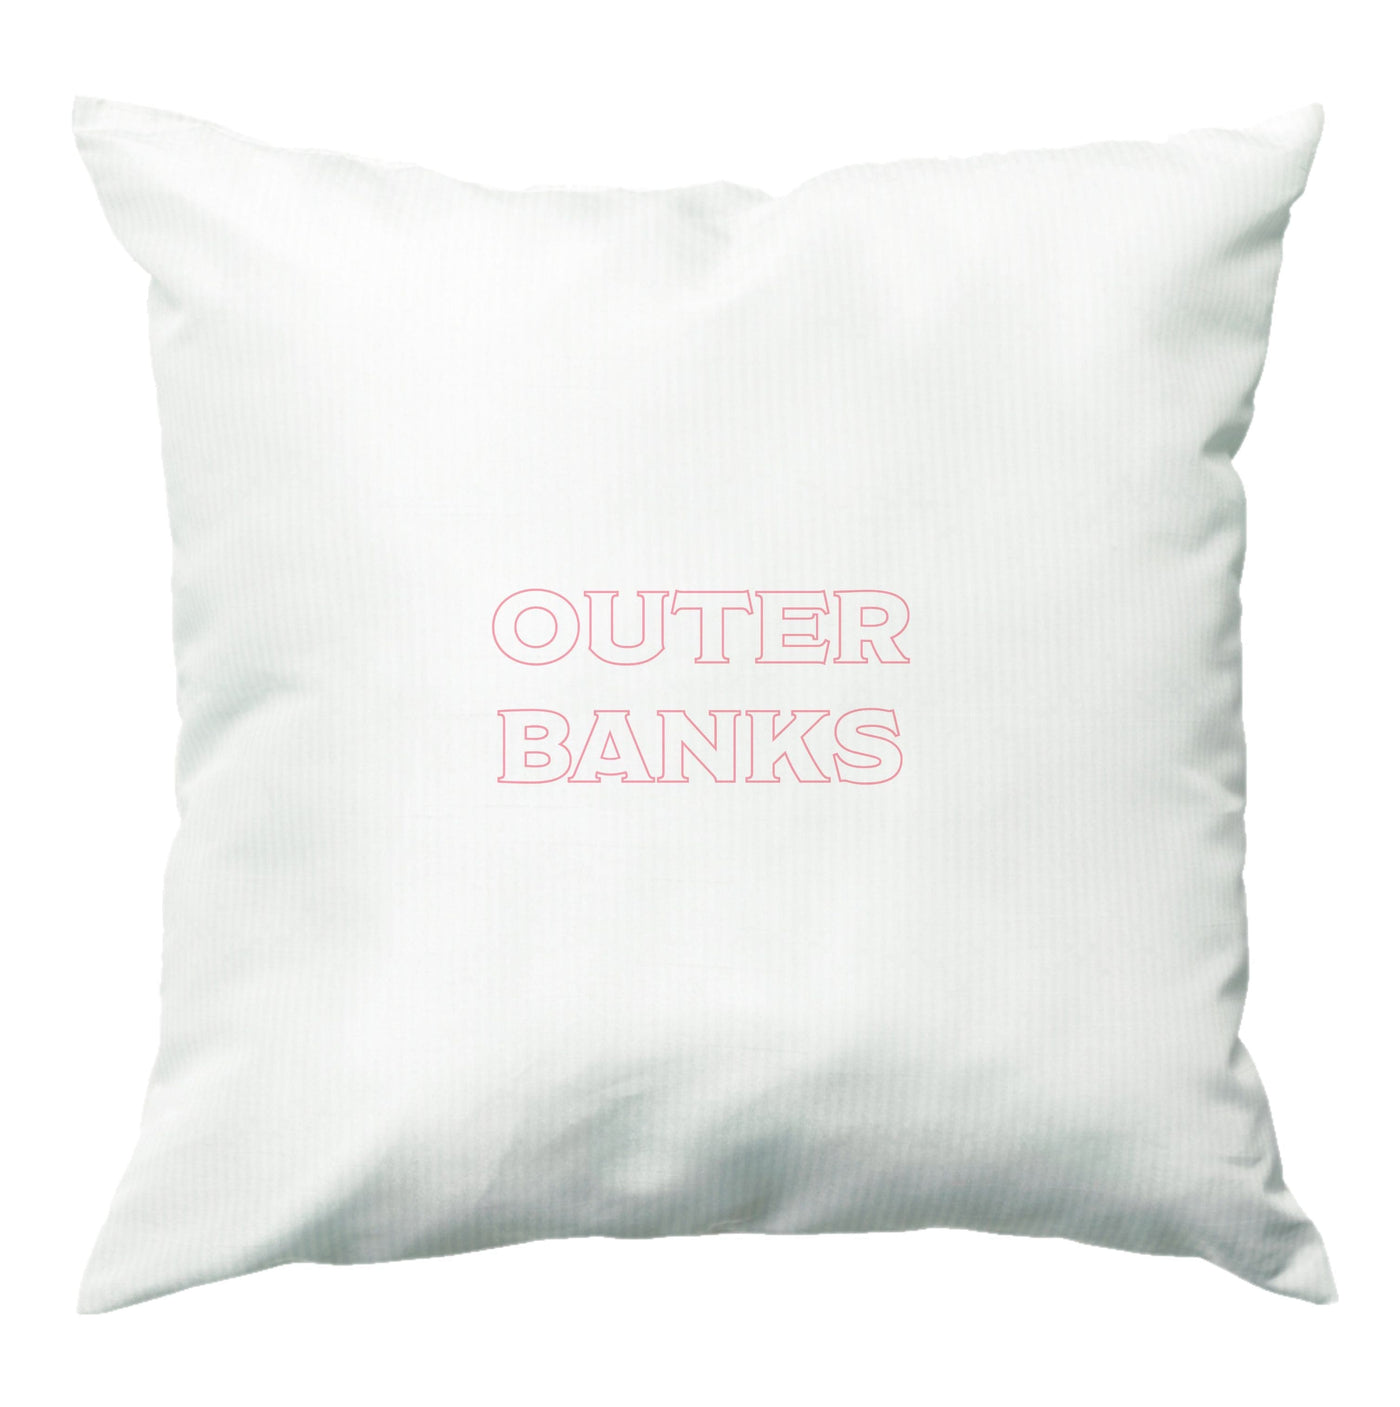 Outer Banks Design  Cushion